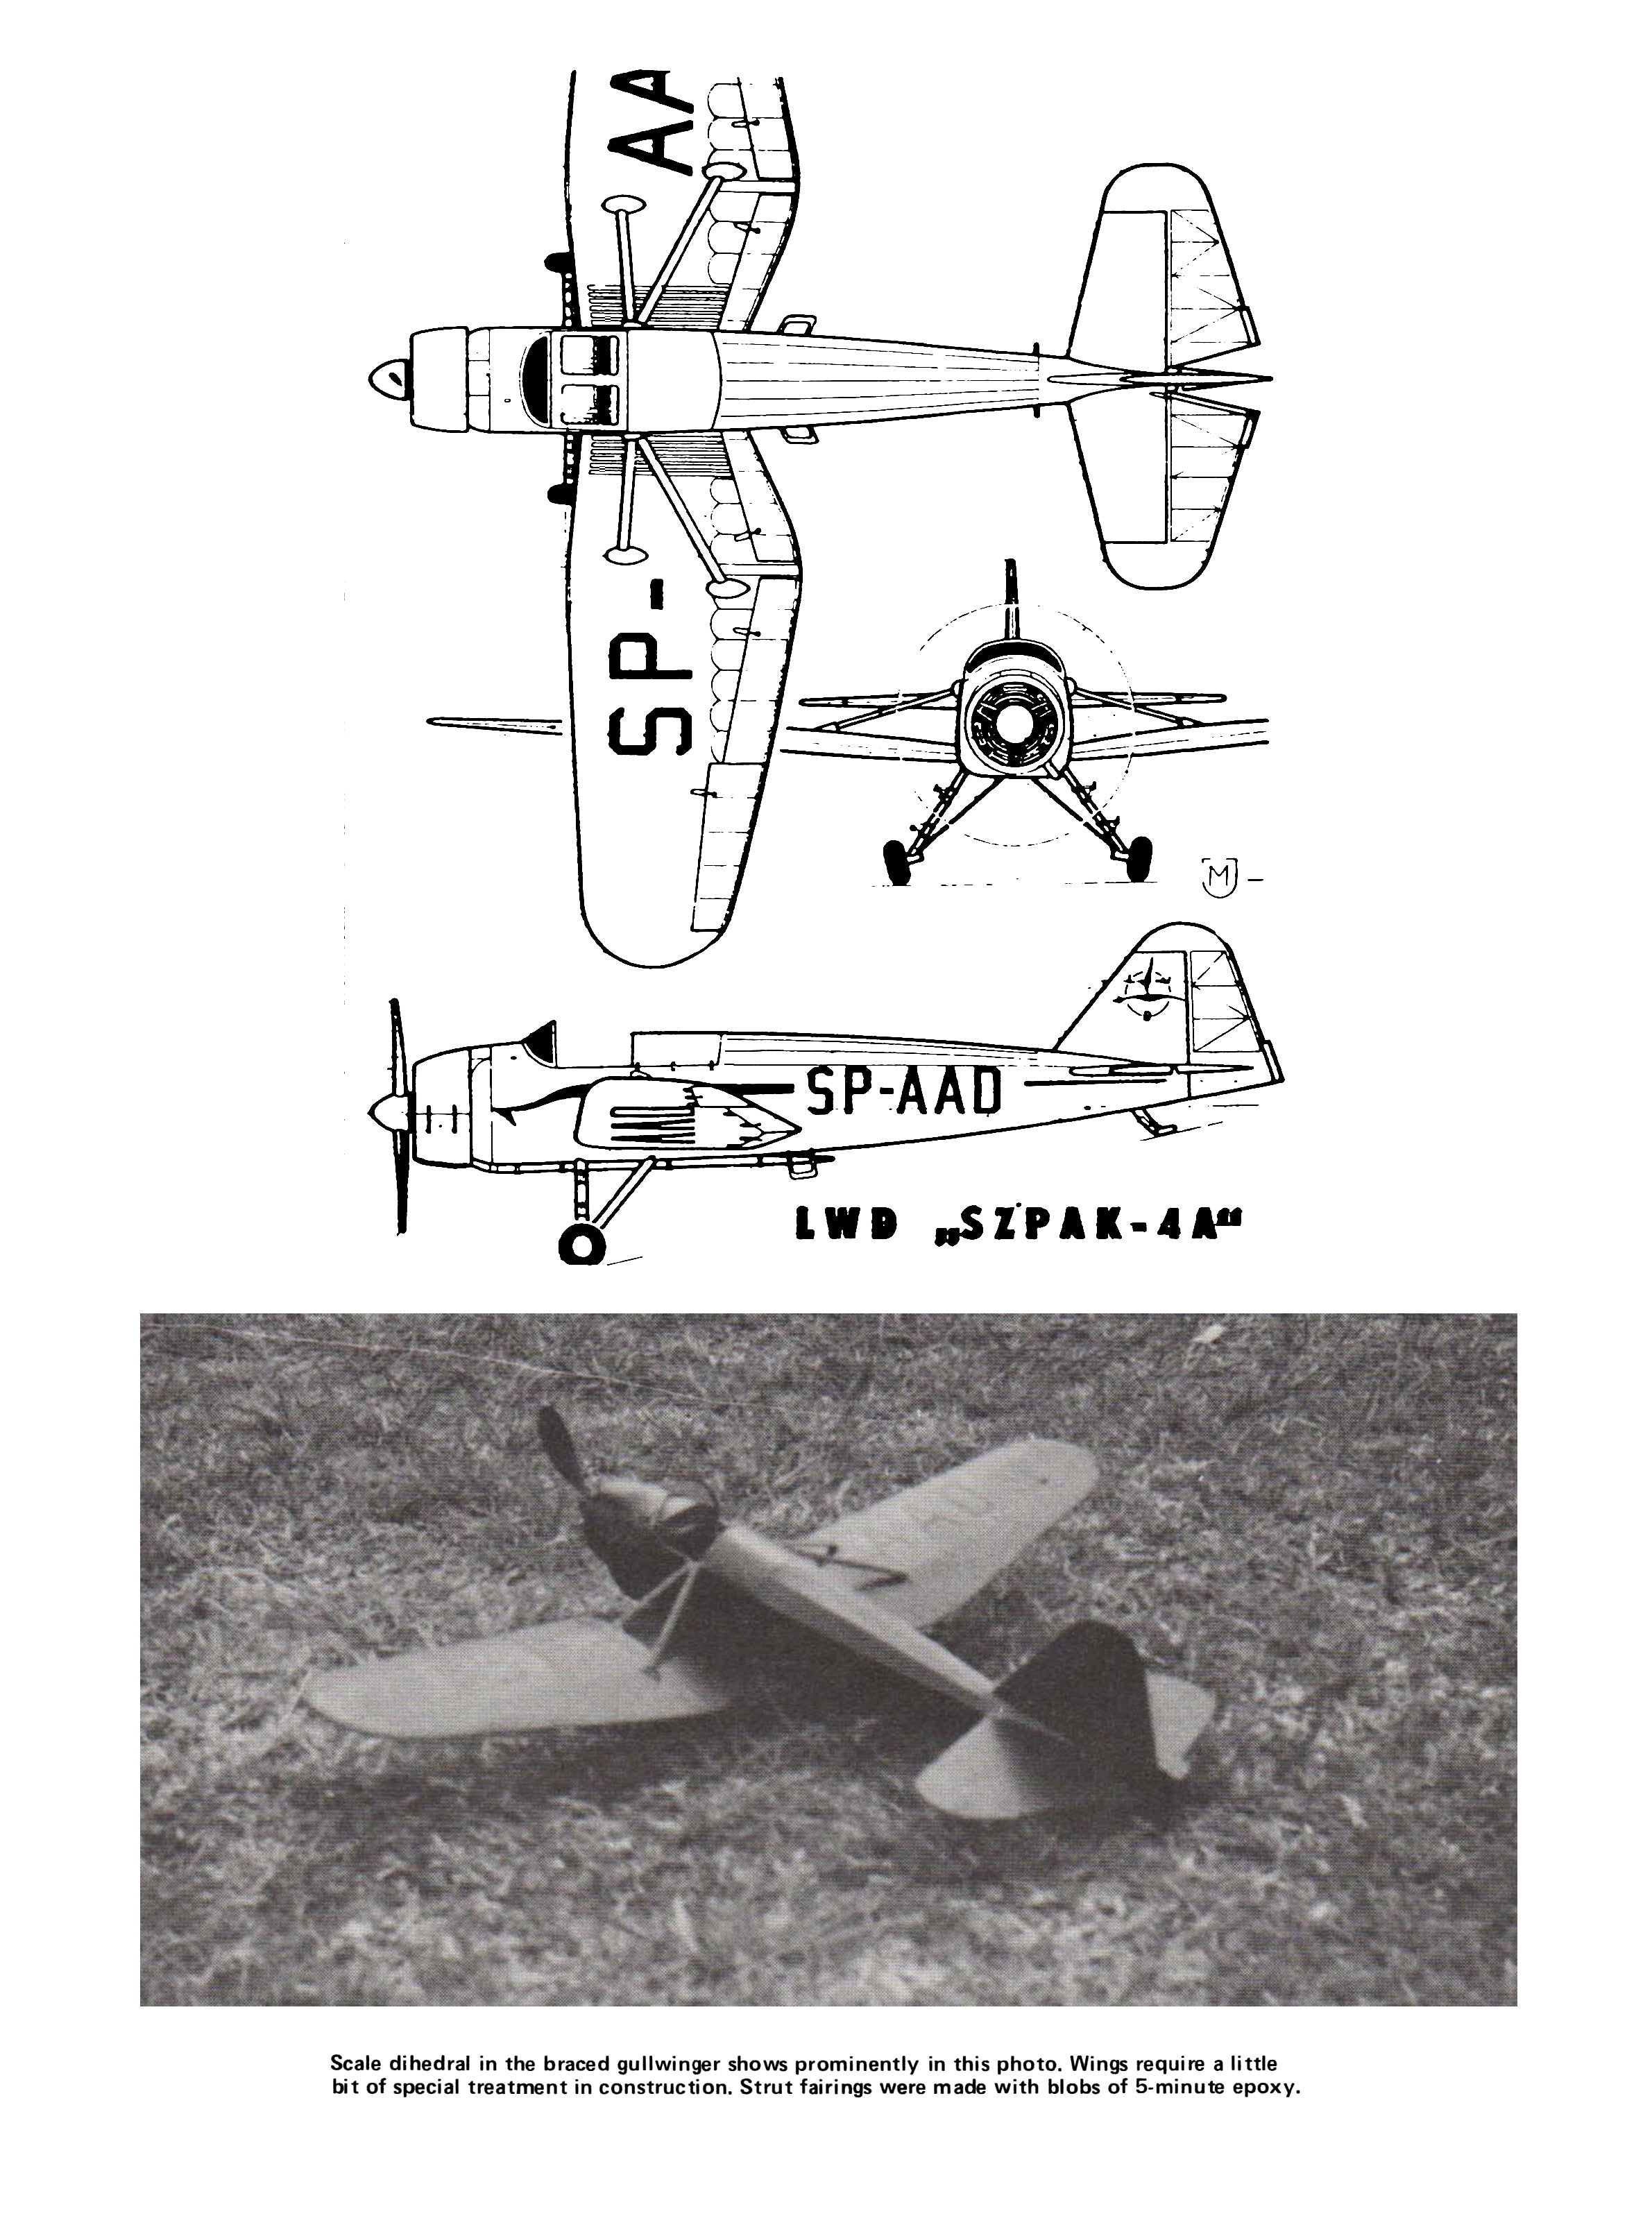 full size printed plans peanut scale " lwd szpak 4as "  flies well in fairly tight left circles